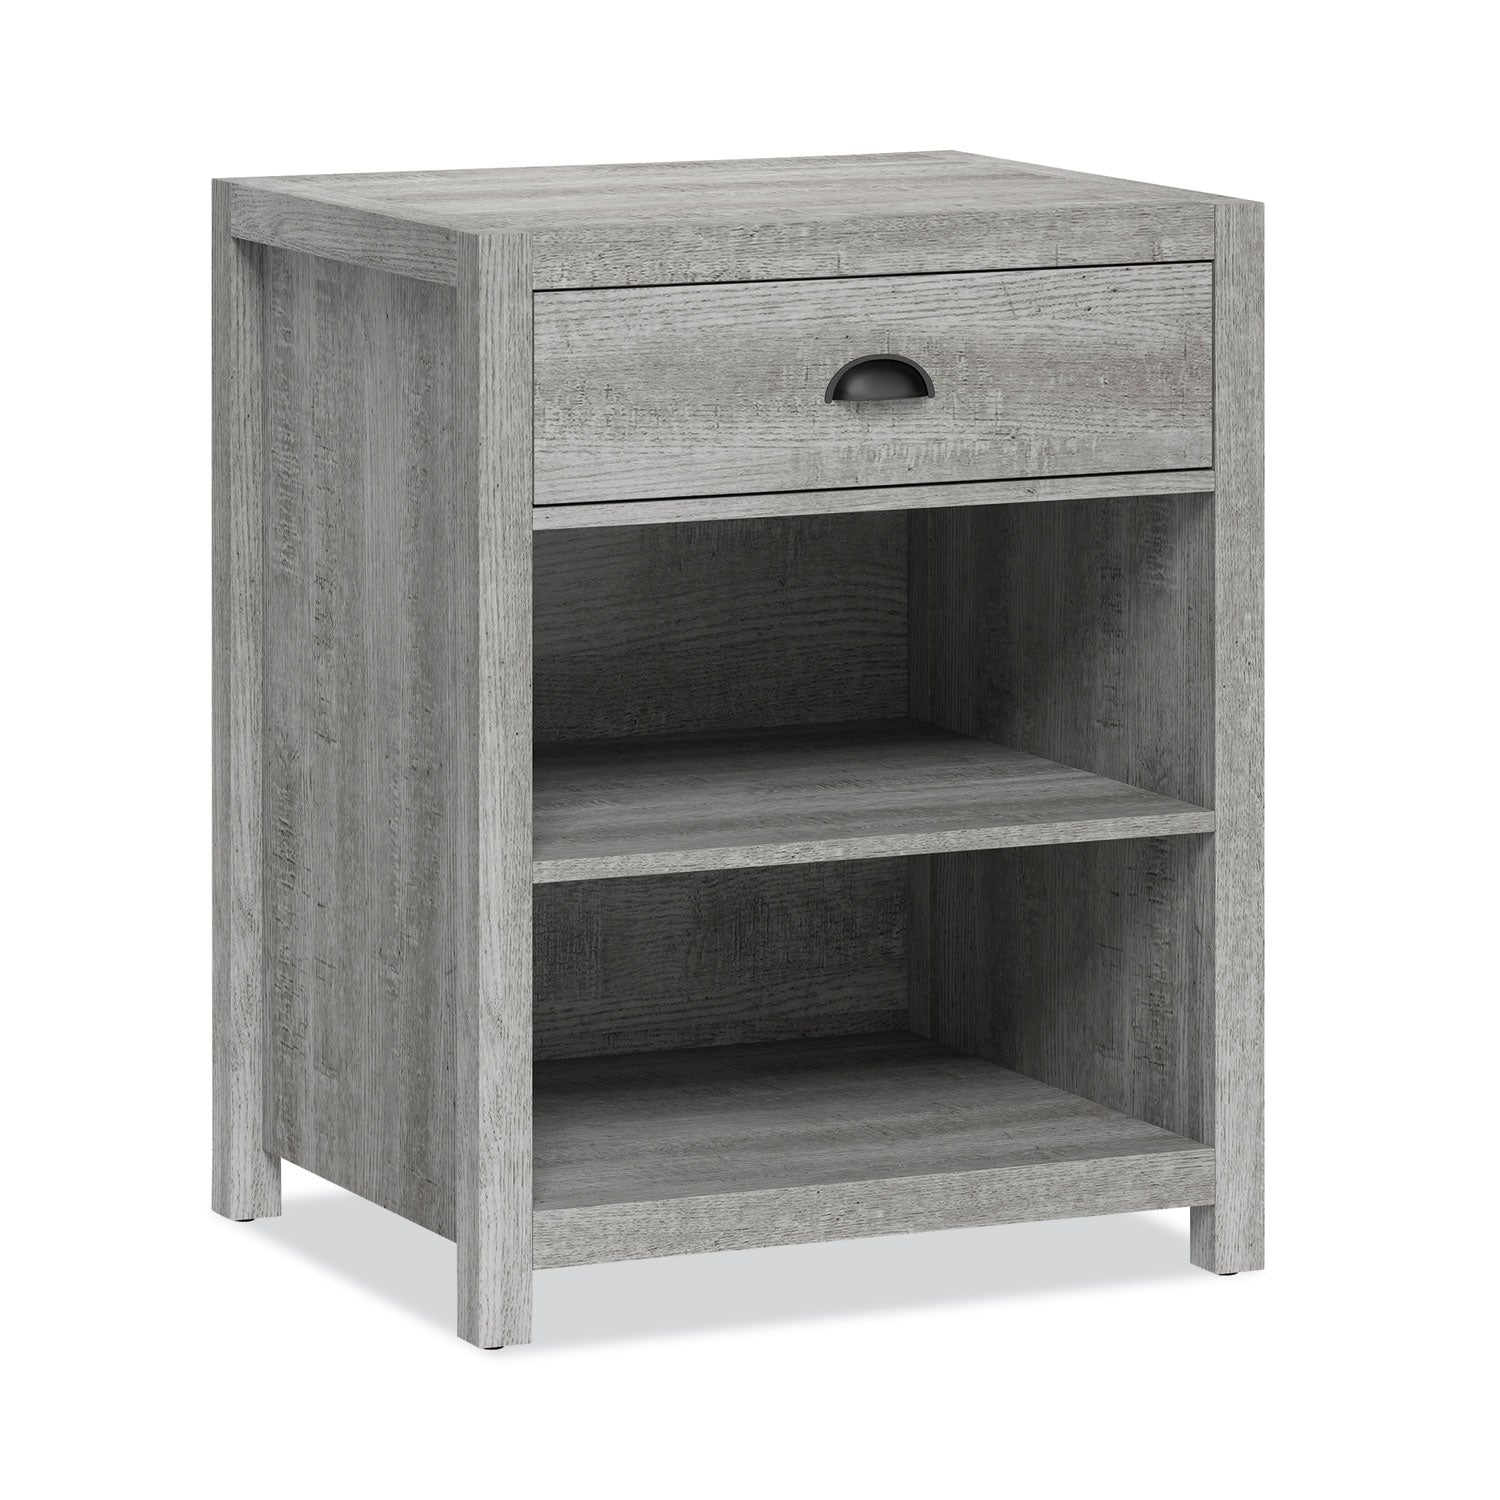 fallbrook-printer-stand-engineered-wood-3-shelves-1-drawer-50-lb-capacity-24-x-20-x-3025-smoked-ash_whlspusfbpsgm - 2